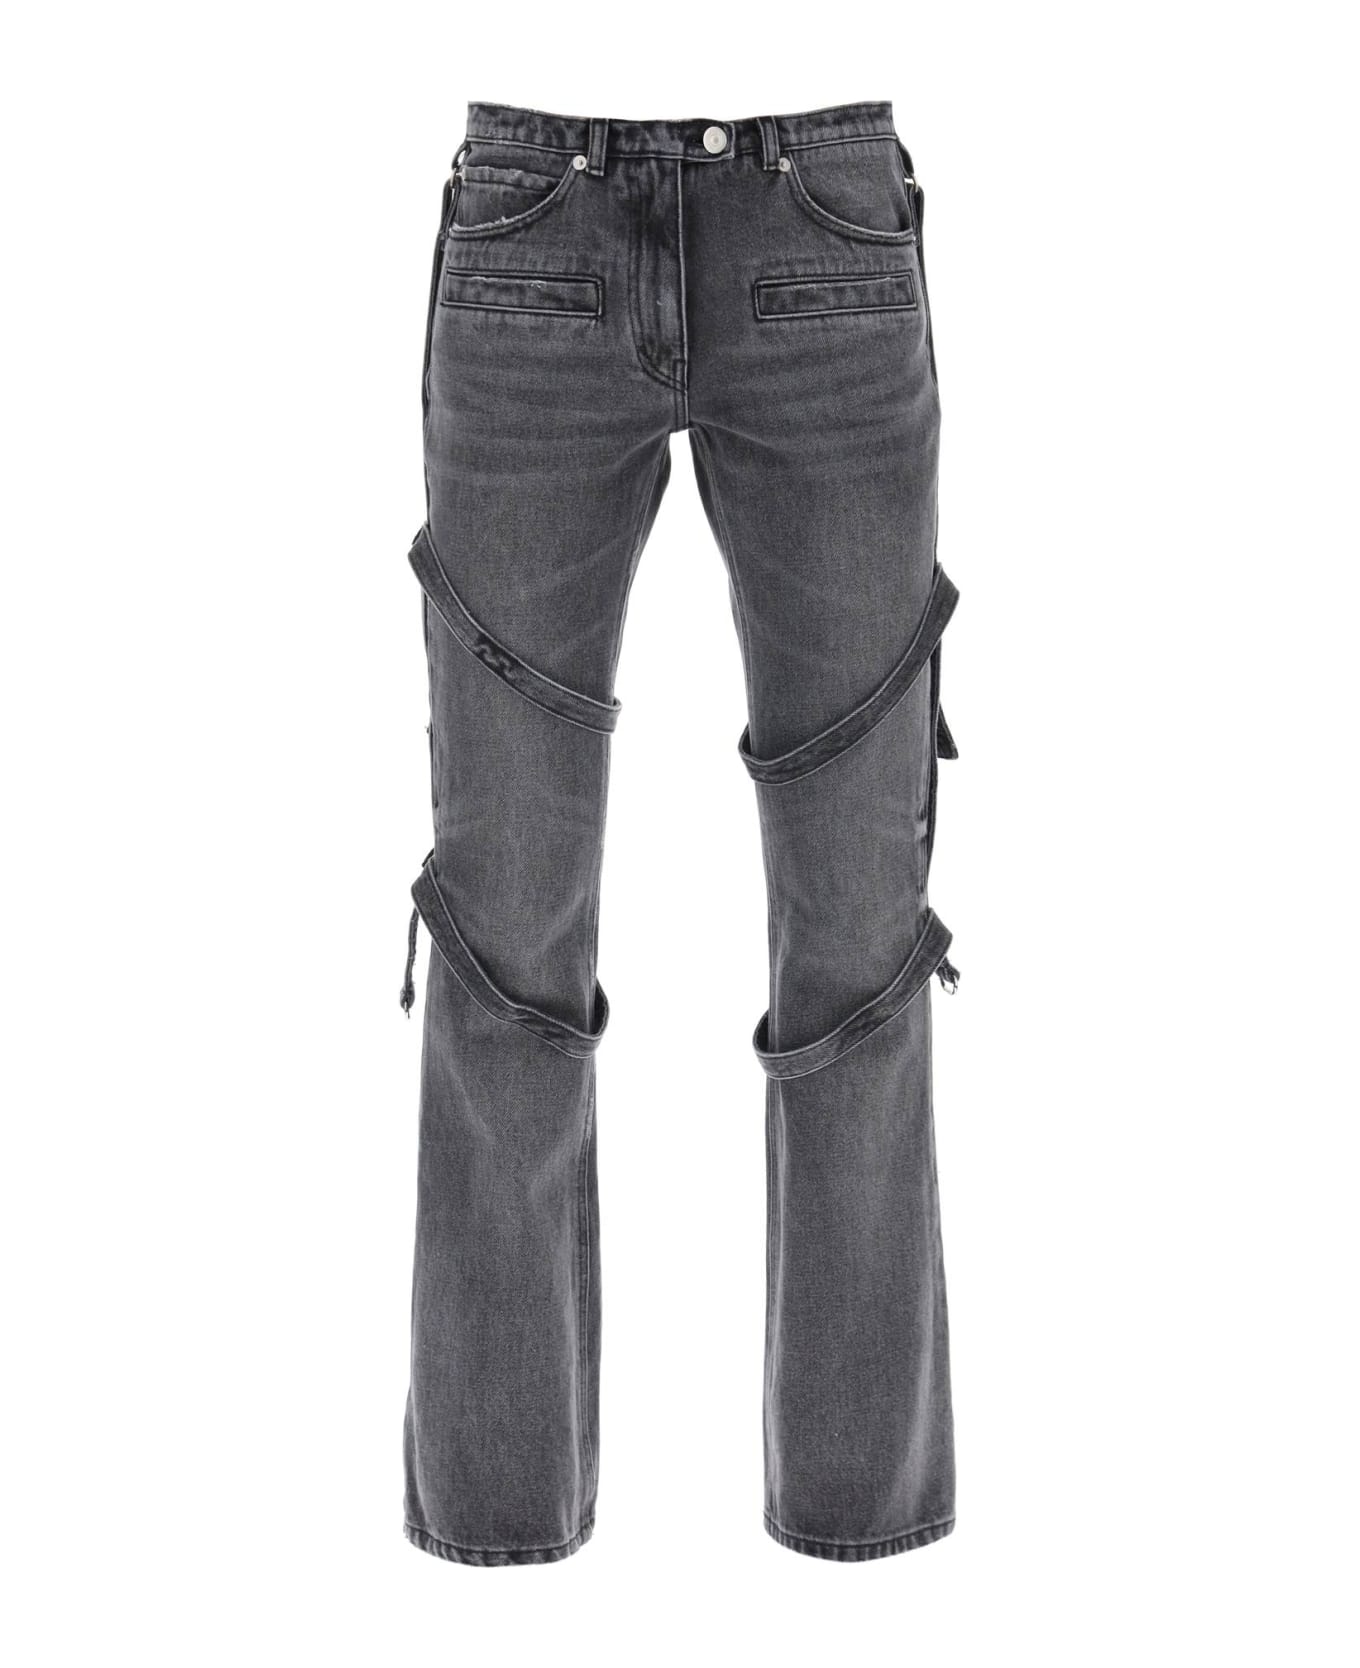 Courrèges Bootcut Jeans With Straps - STONEWAHSED GREY (Grey) デニム